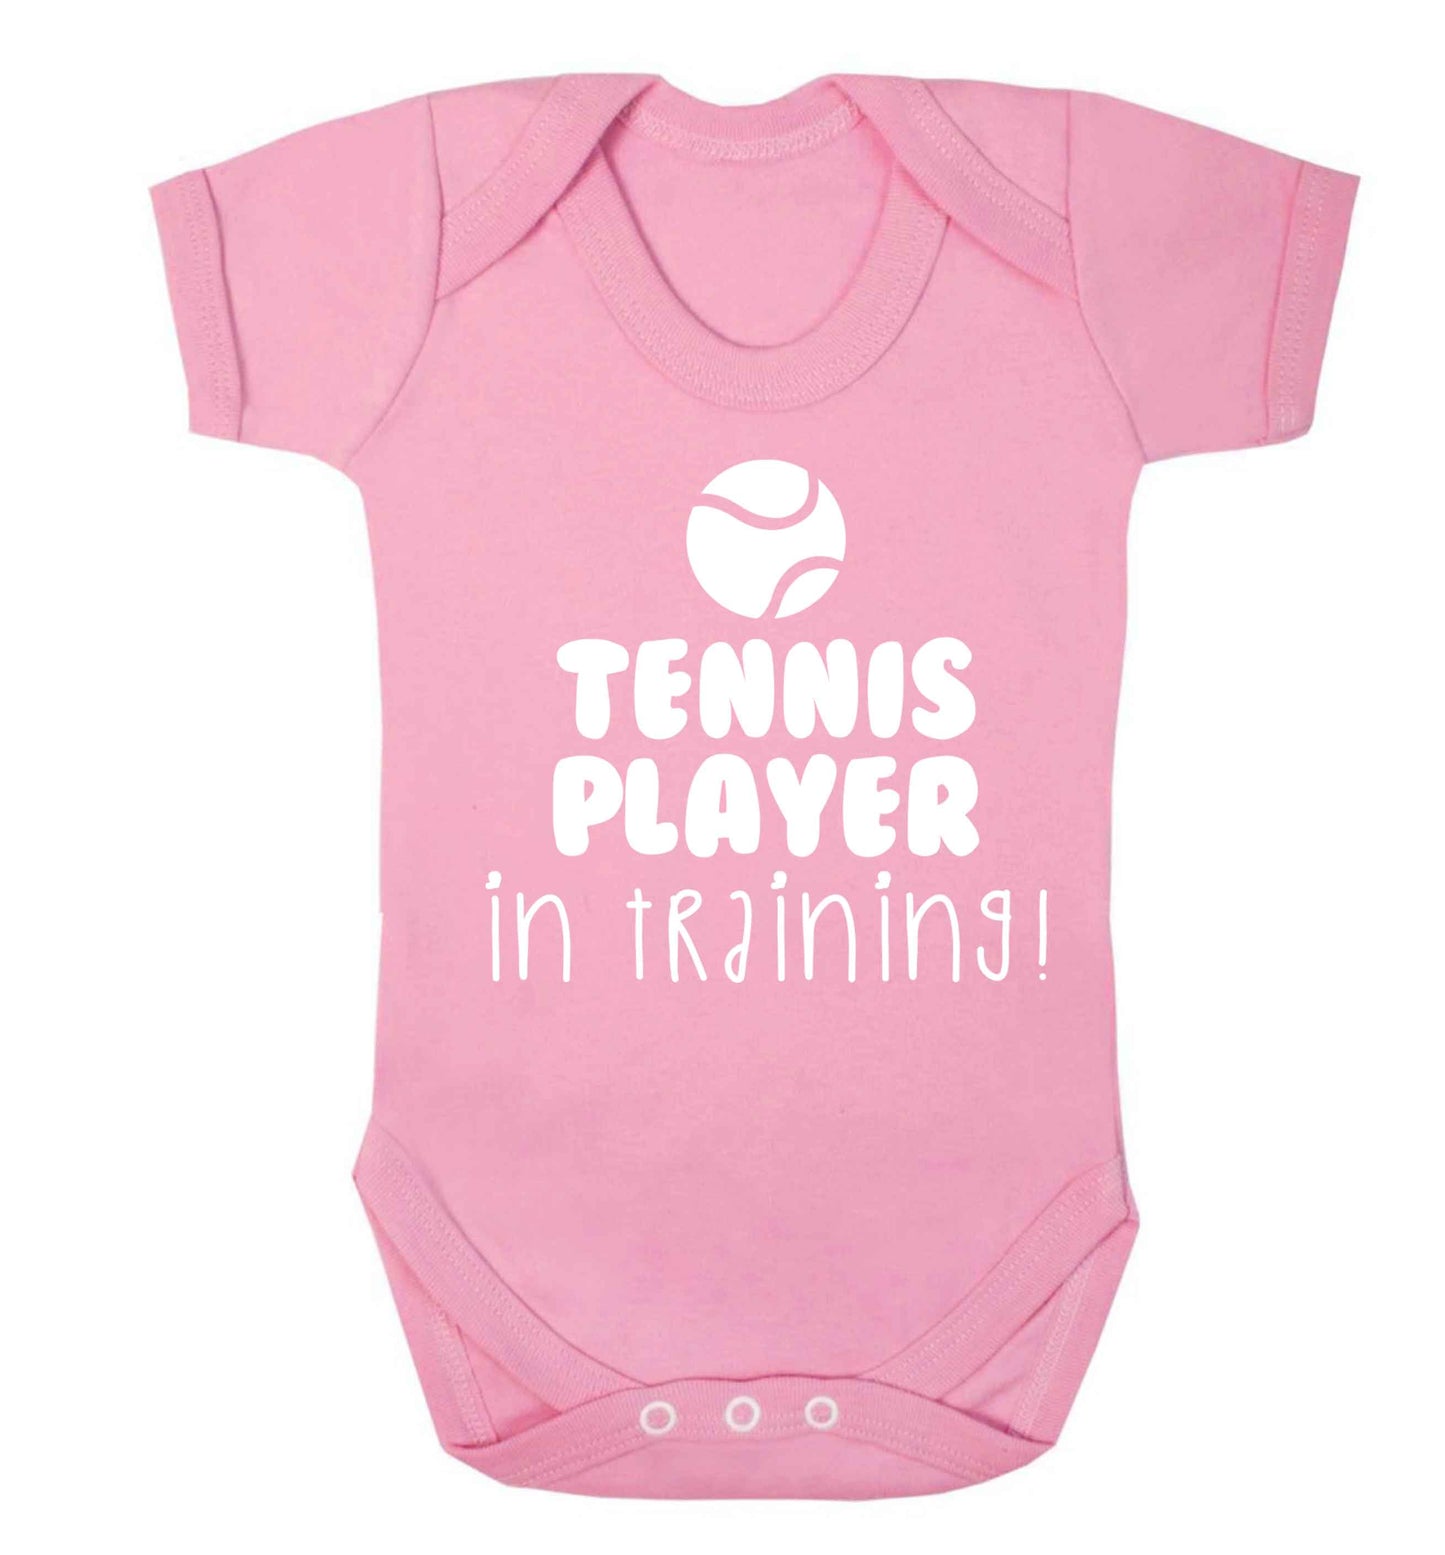 Tennis player in training Baby Vest pale pink 18-24 months